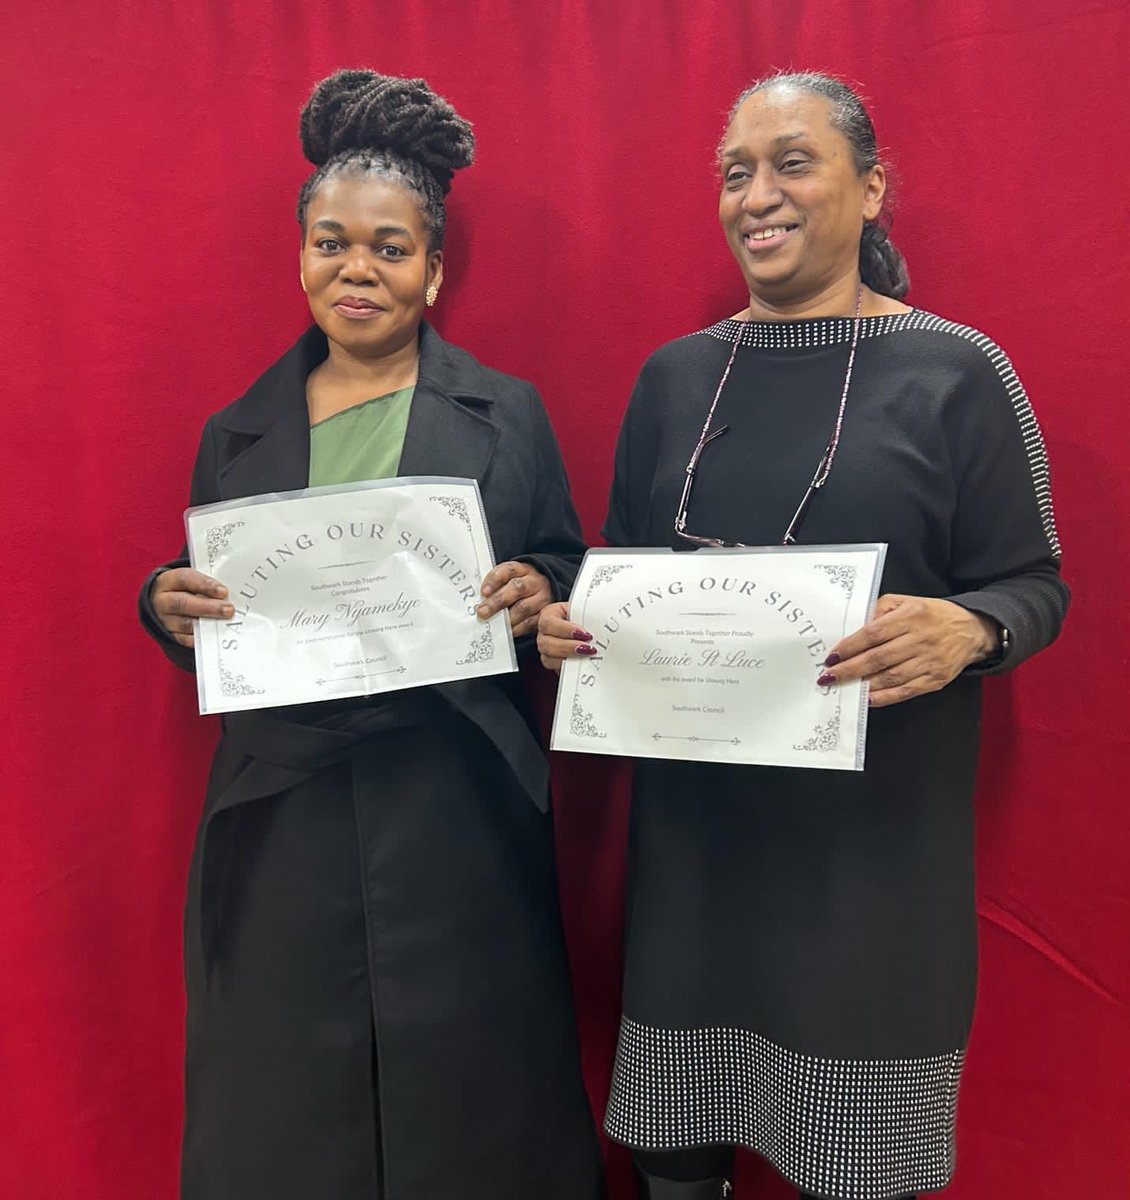 Congratulations to Laurie who was nominated as an ‘unsung hero’ in the @lb_southwark #salutingoursisters awards. We were delighted that she won!Laurie has supported so many families & we are grateful to her. 
Congratulations to Mary from @tbprimary who was also nominated.